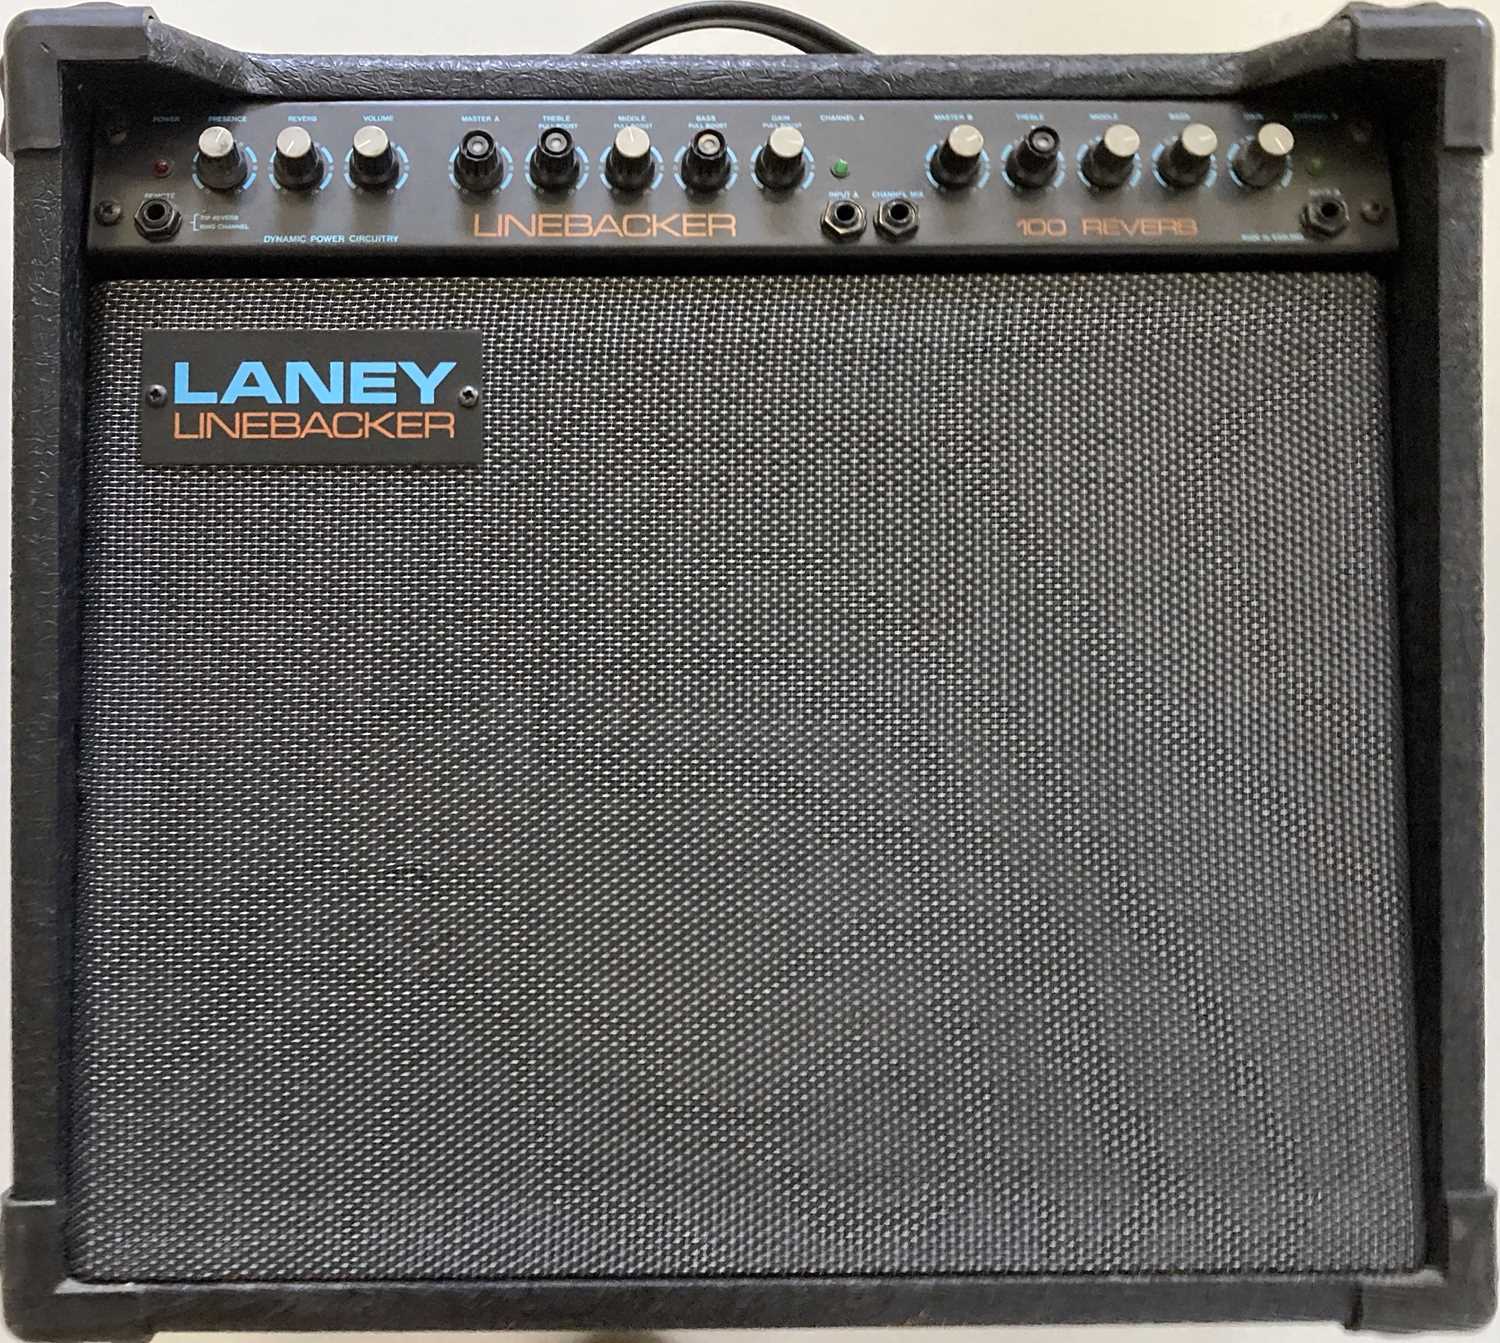 Lot 70 - LANEY LINEBACKER AMP (PLUS 2 COVERS) - NED'S ATOMIC DUSTBIN USED.